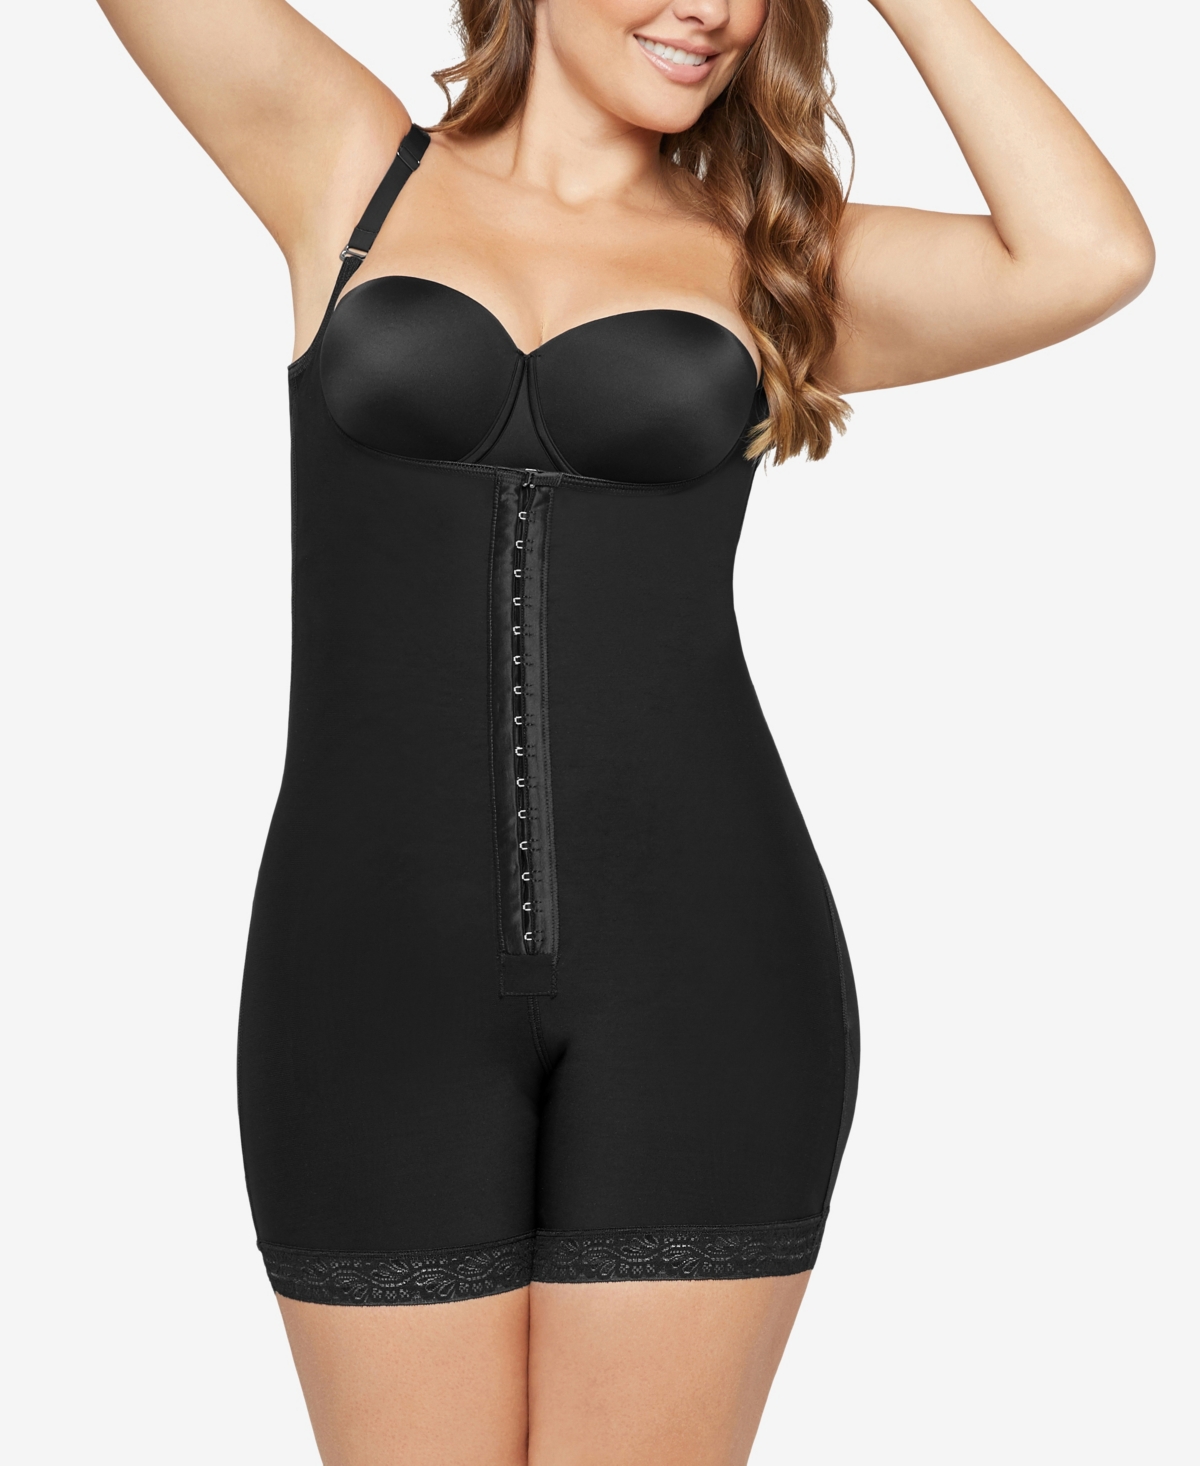 Leonisa 18520 Sculpting Body Shaper with Built-In Back Support Bra